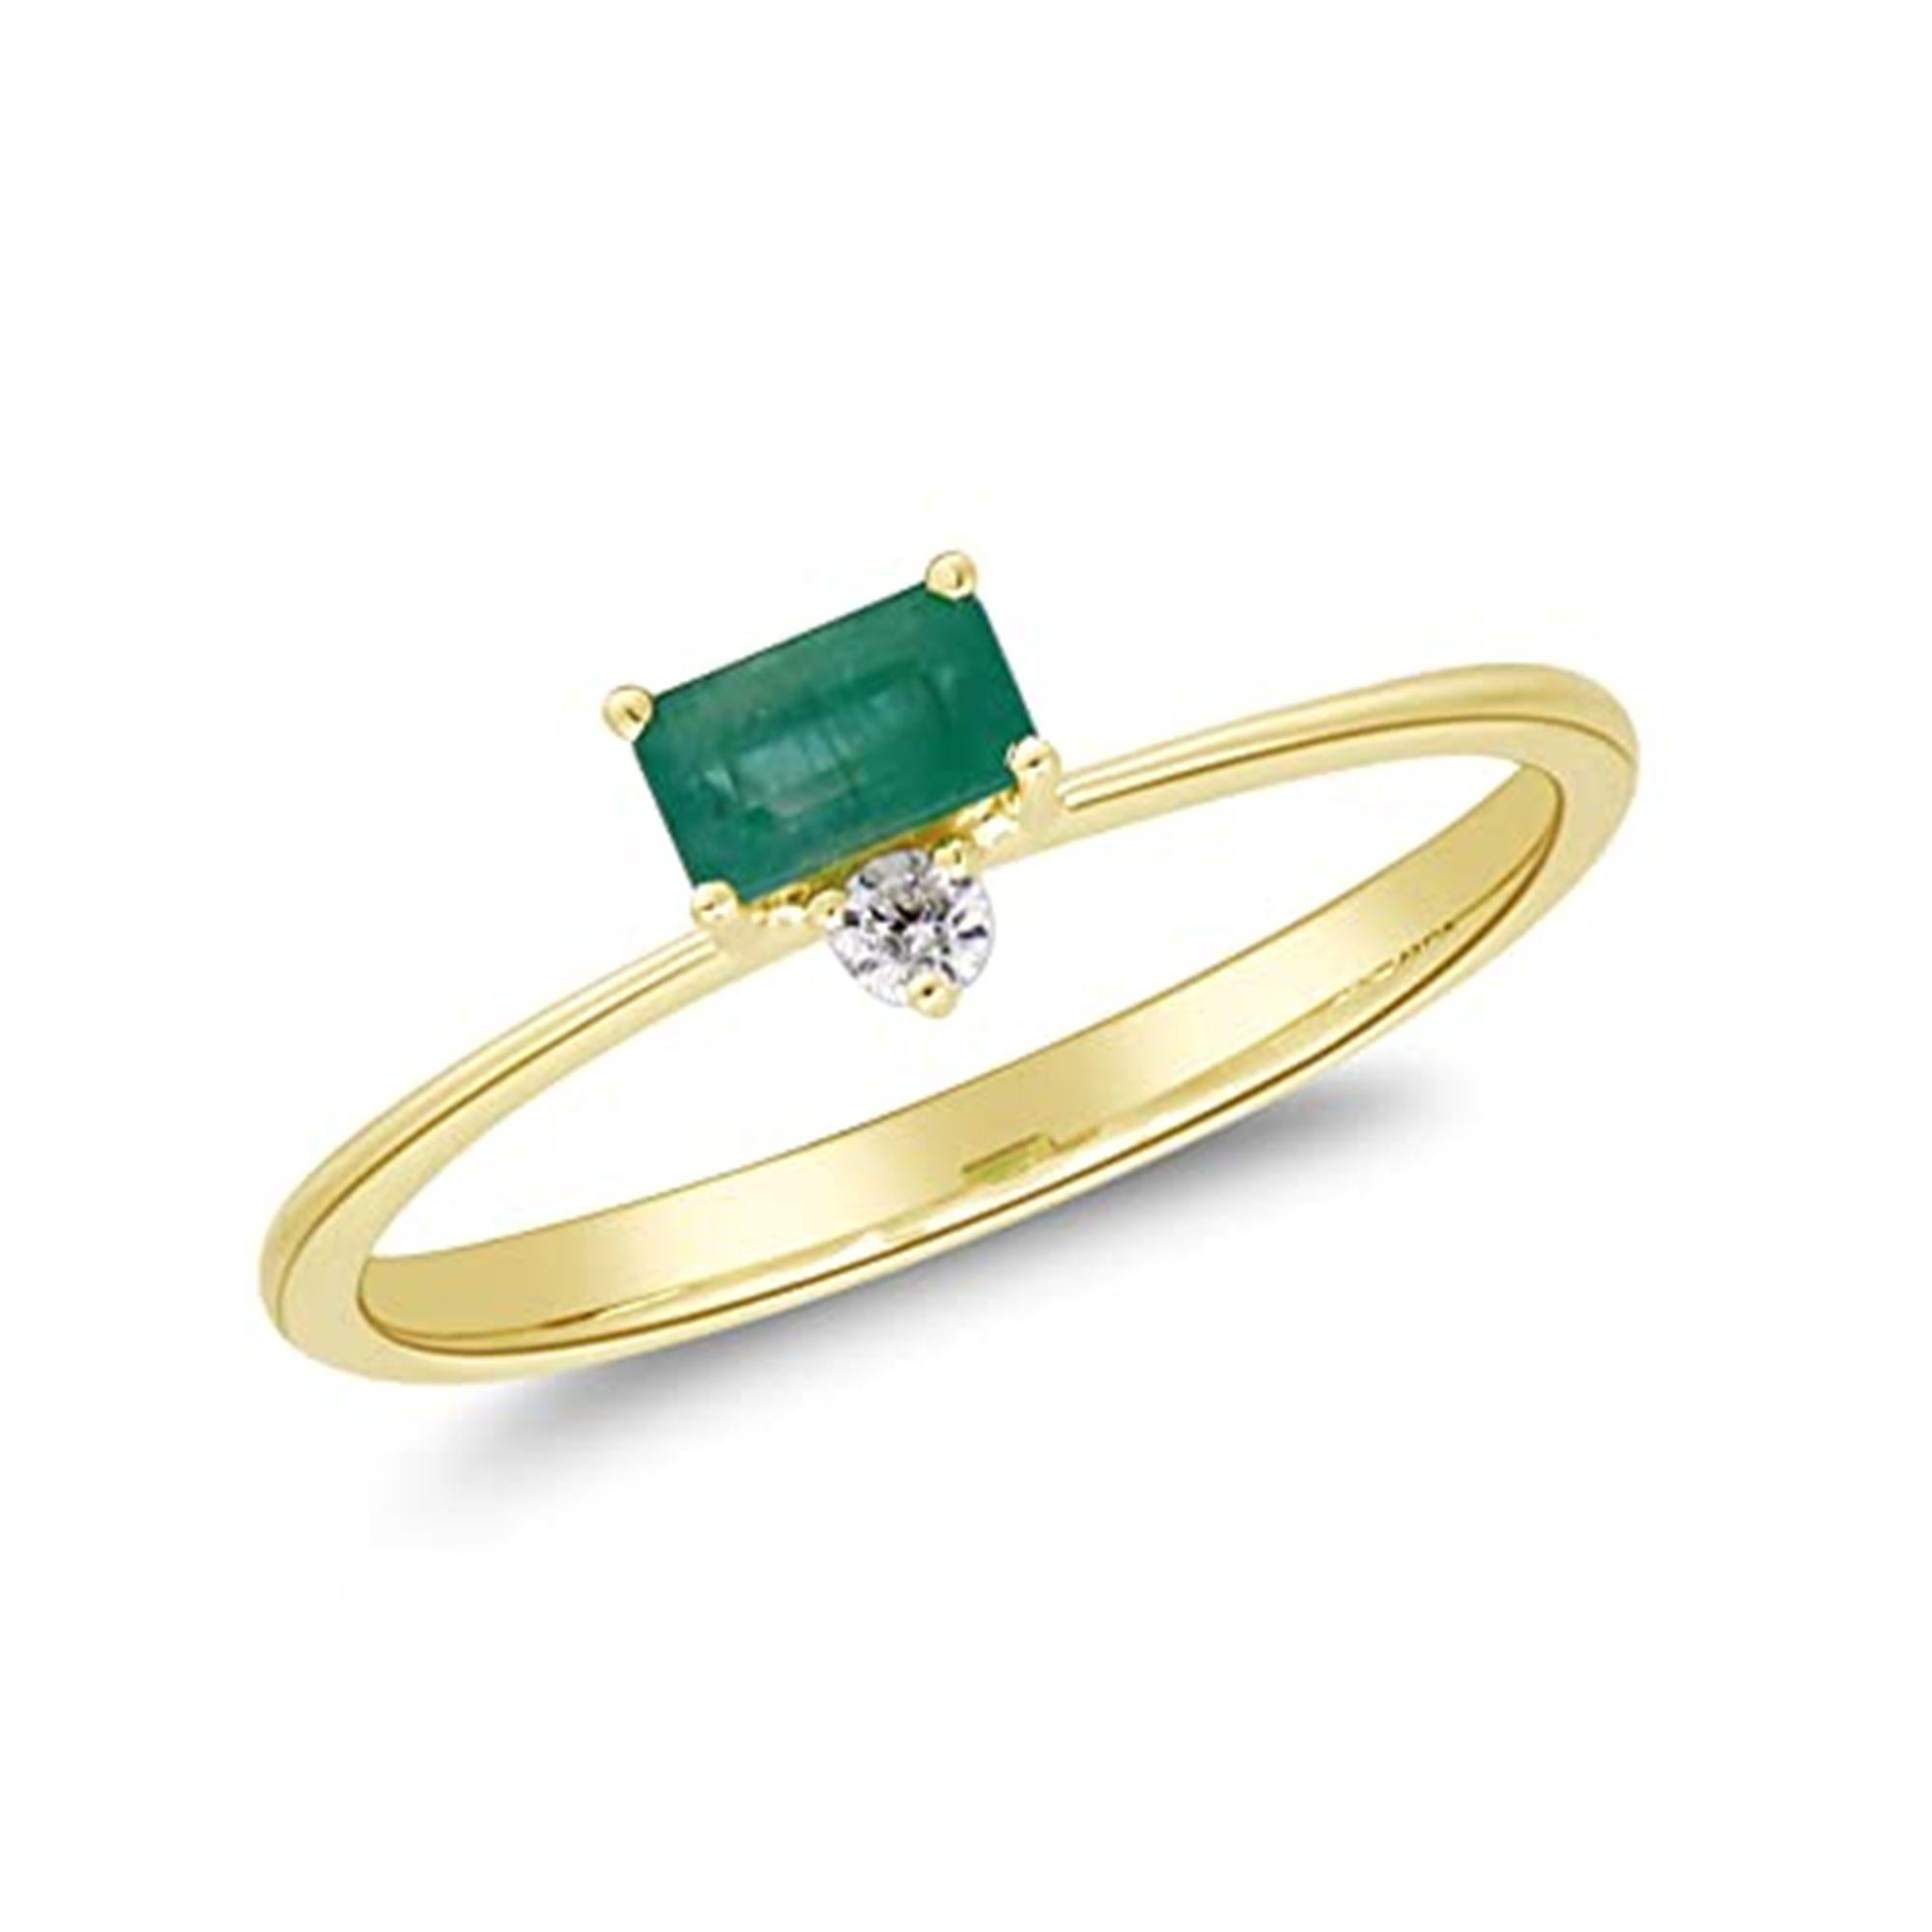 Emerald Cut 0.33 Carat Emerald-Cut Emerald with Diamond Accents 14K Yellow Gold Ring For Sale